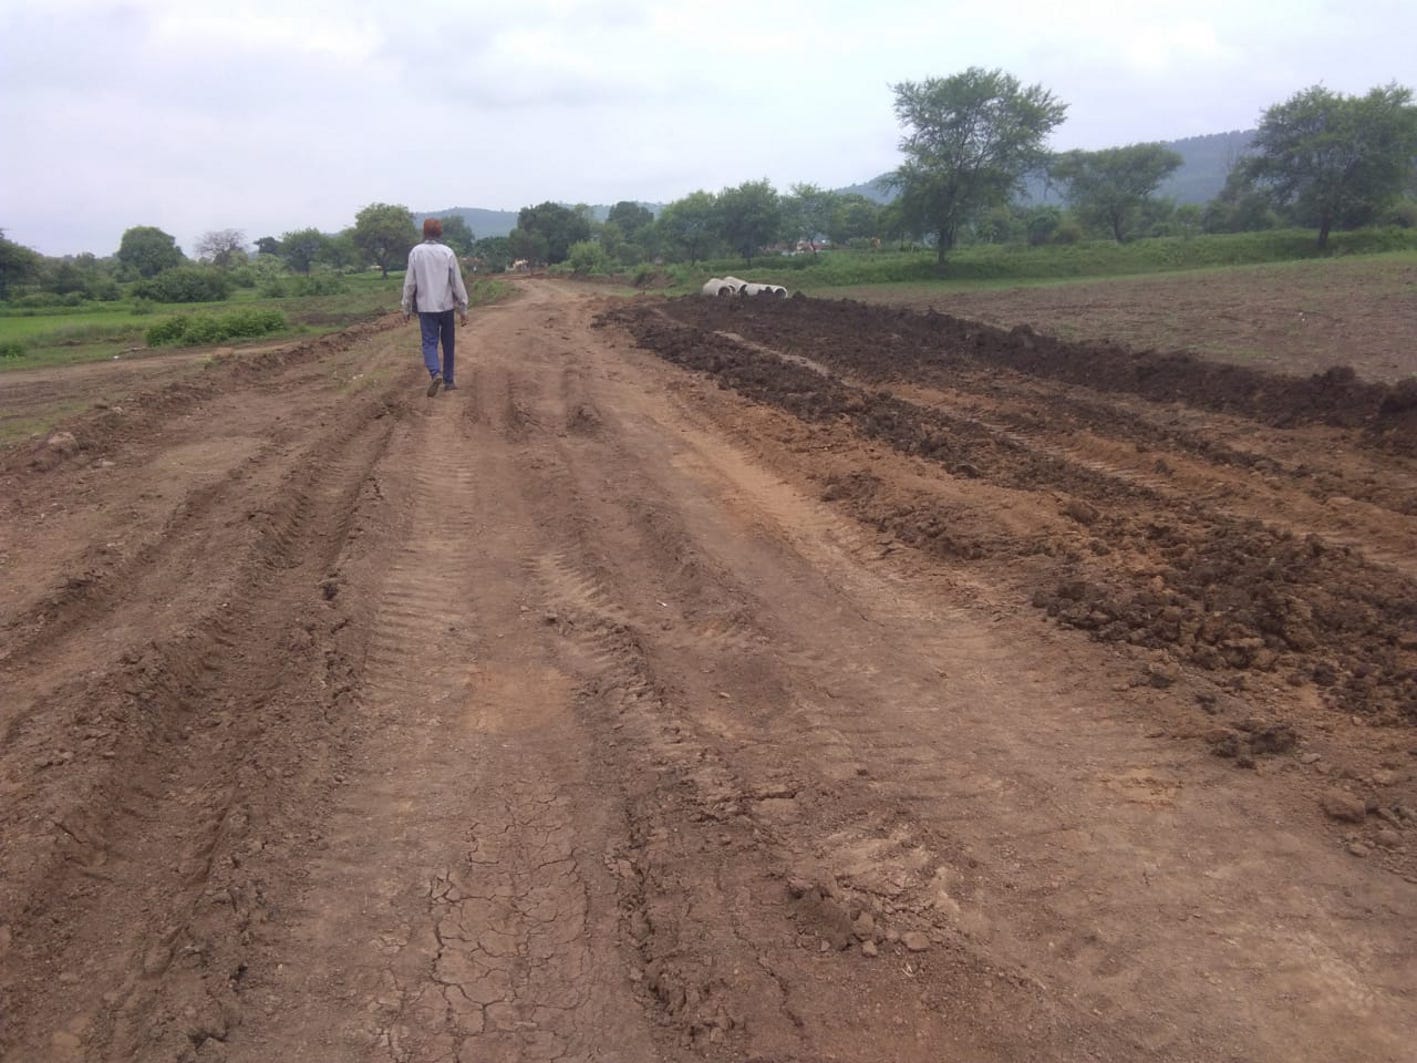 Gravel road being built by illegal mining